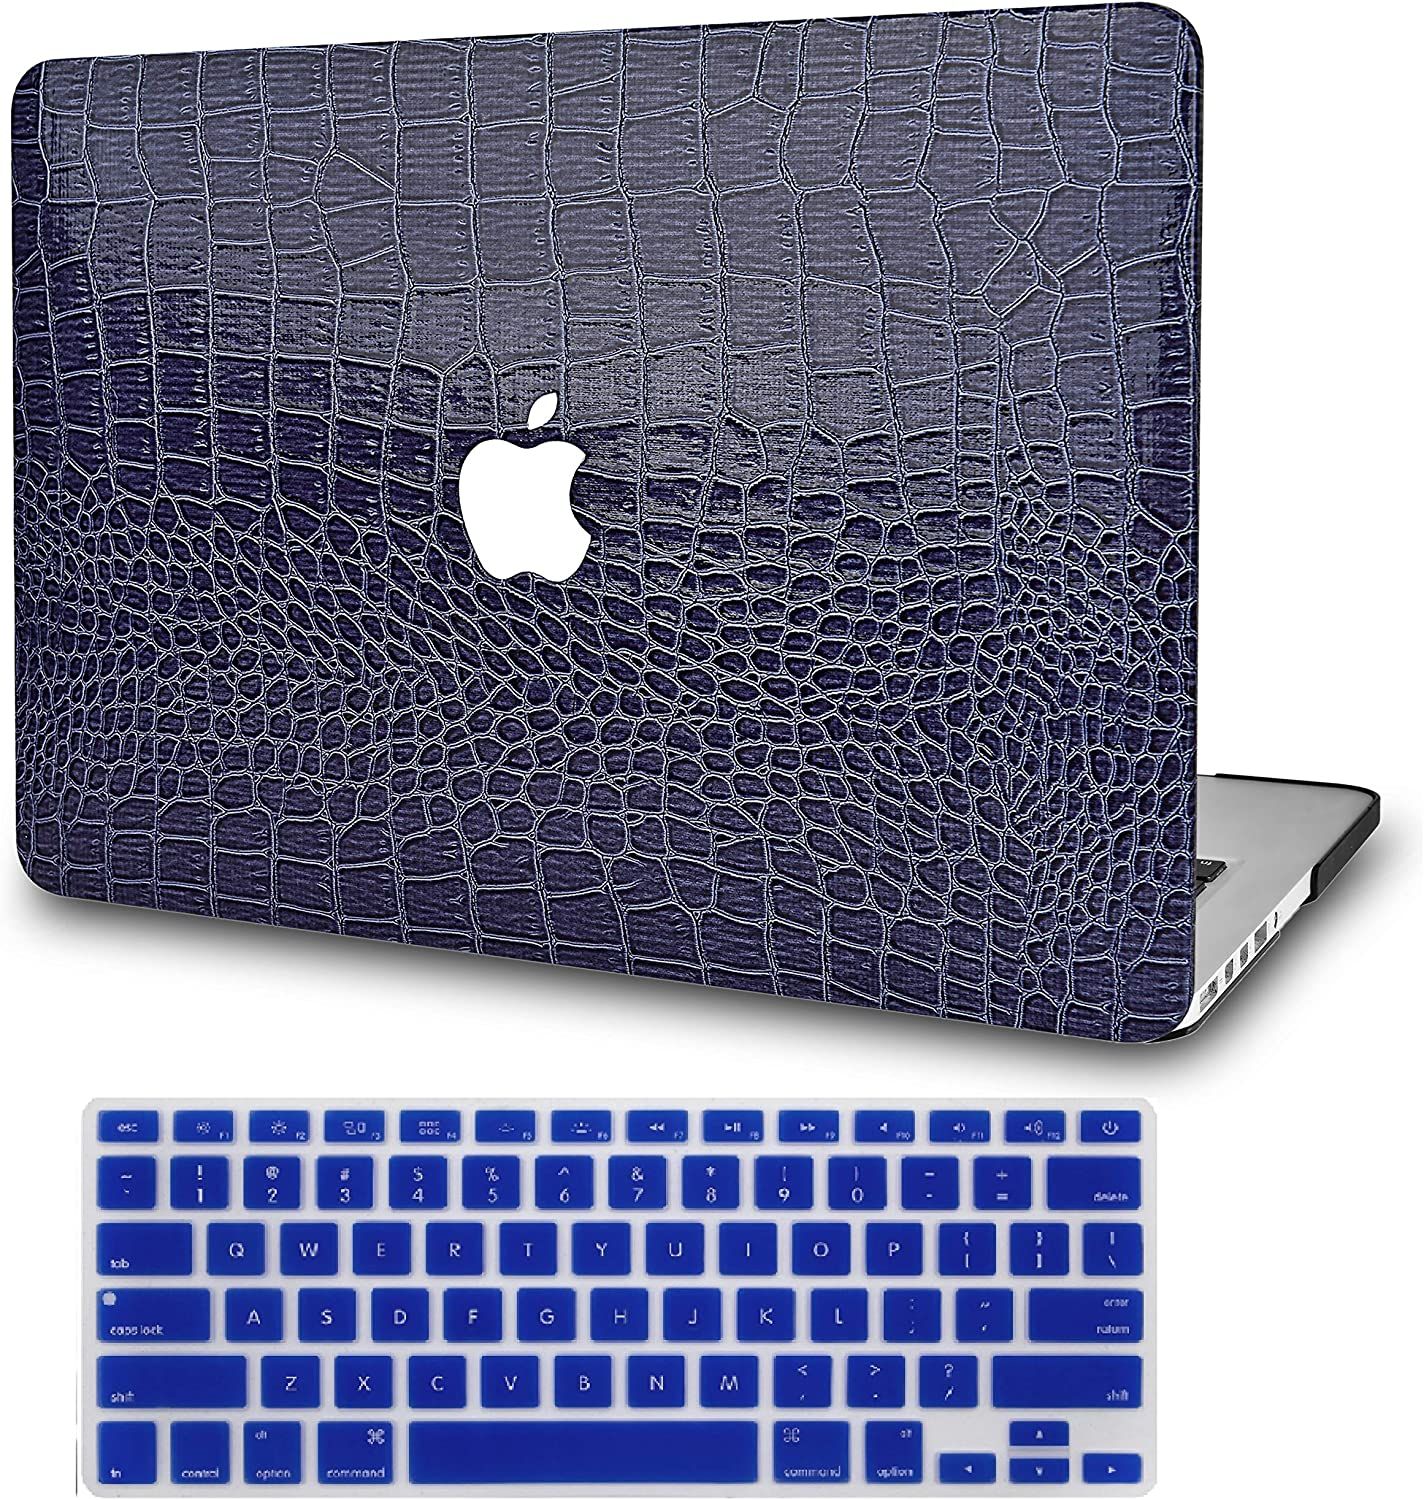 What are the best cases for macbook pro rightlasopa